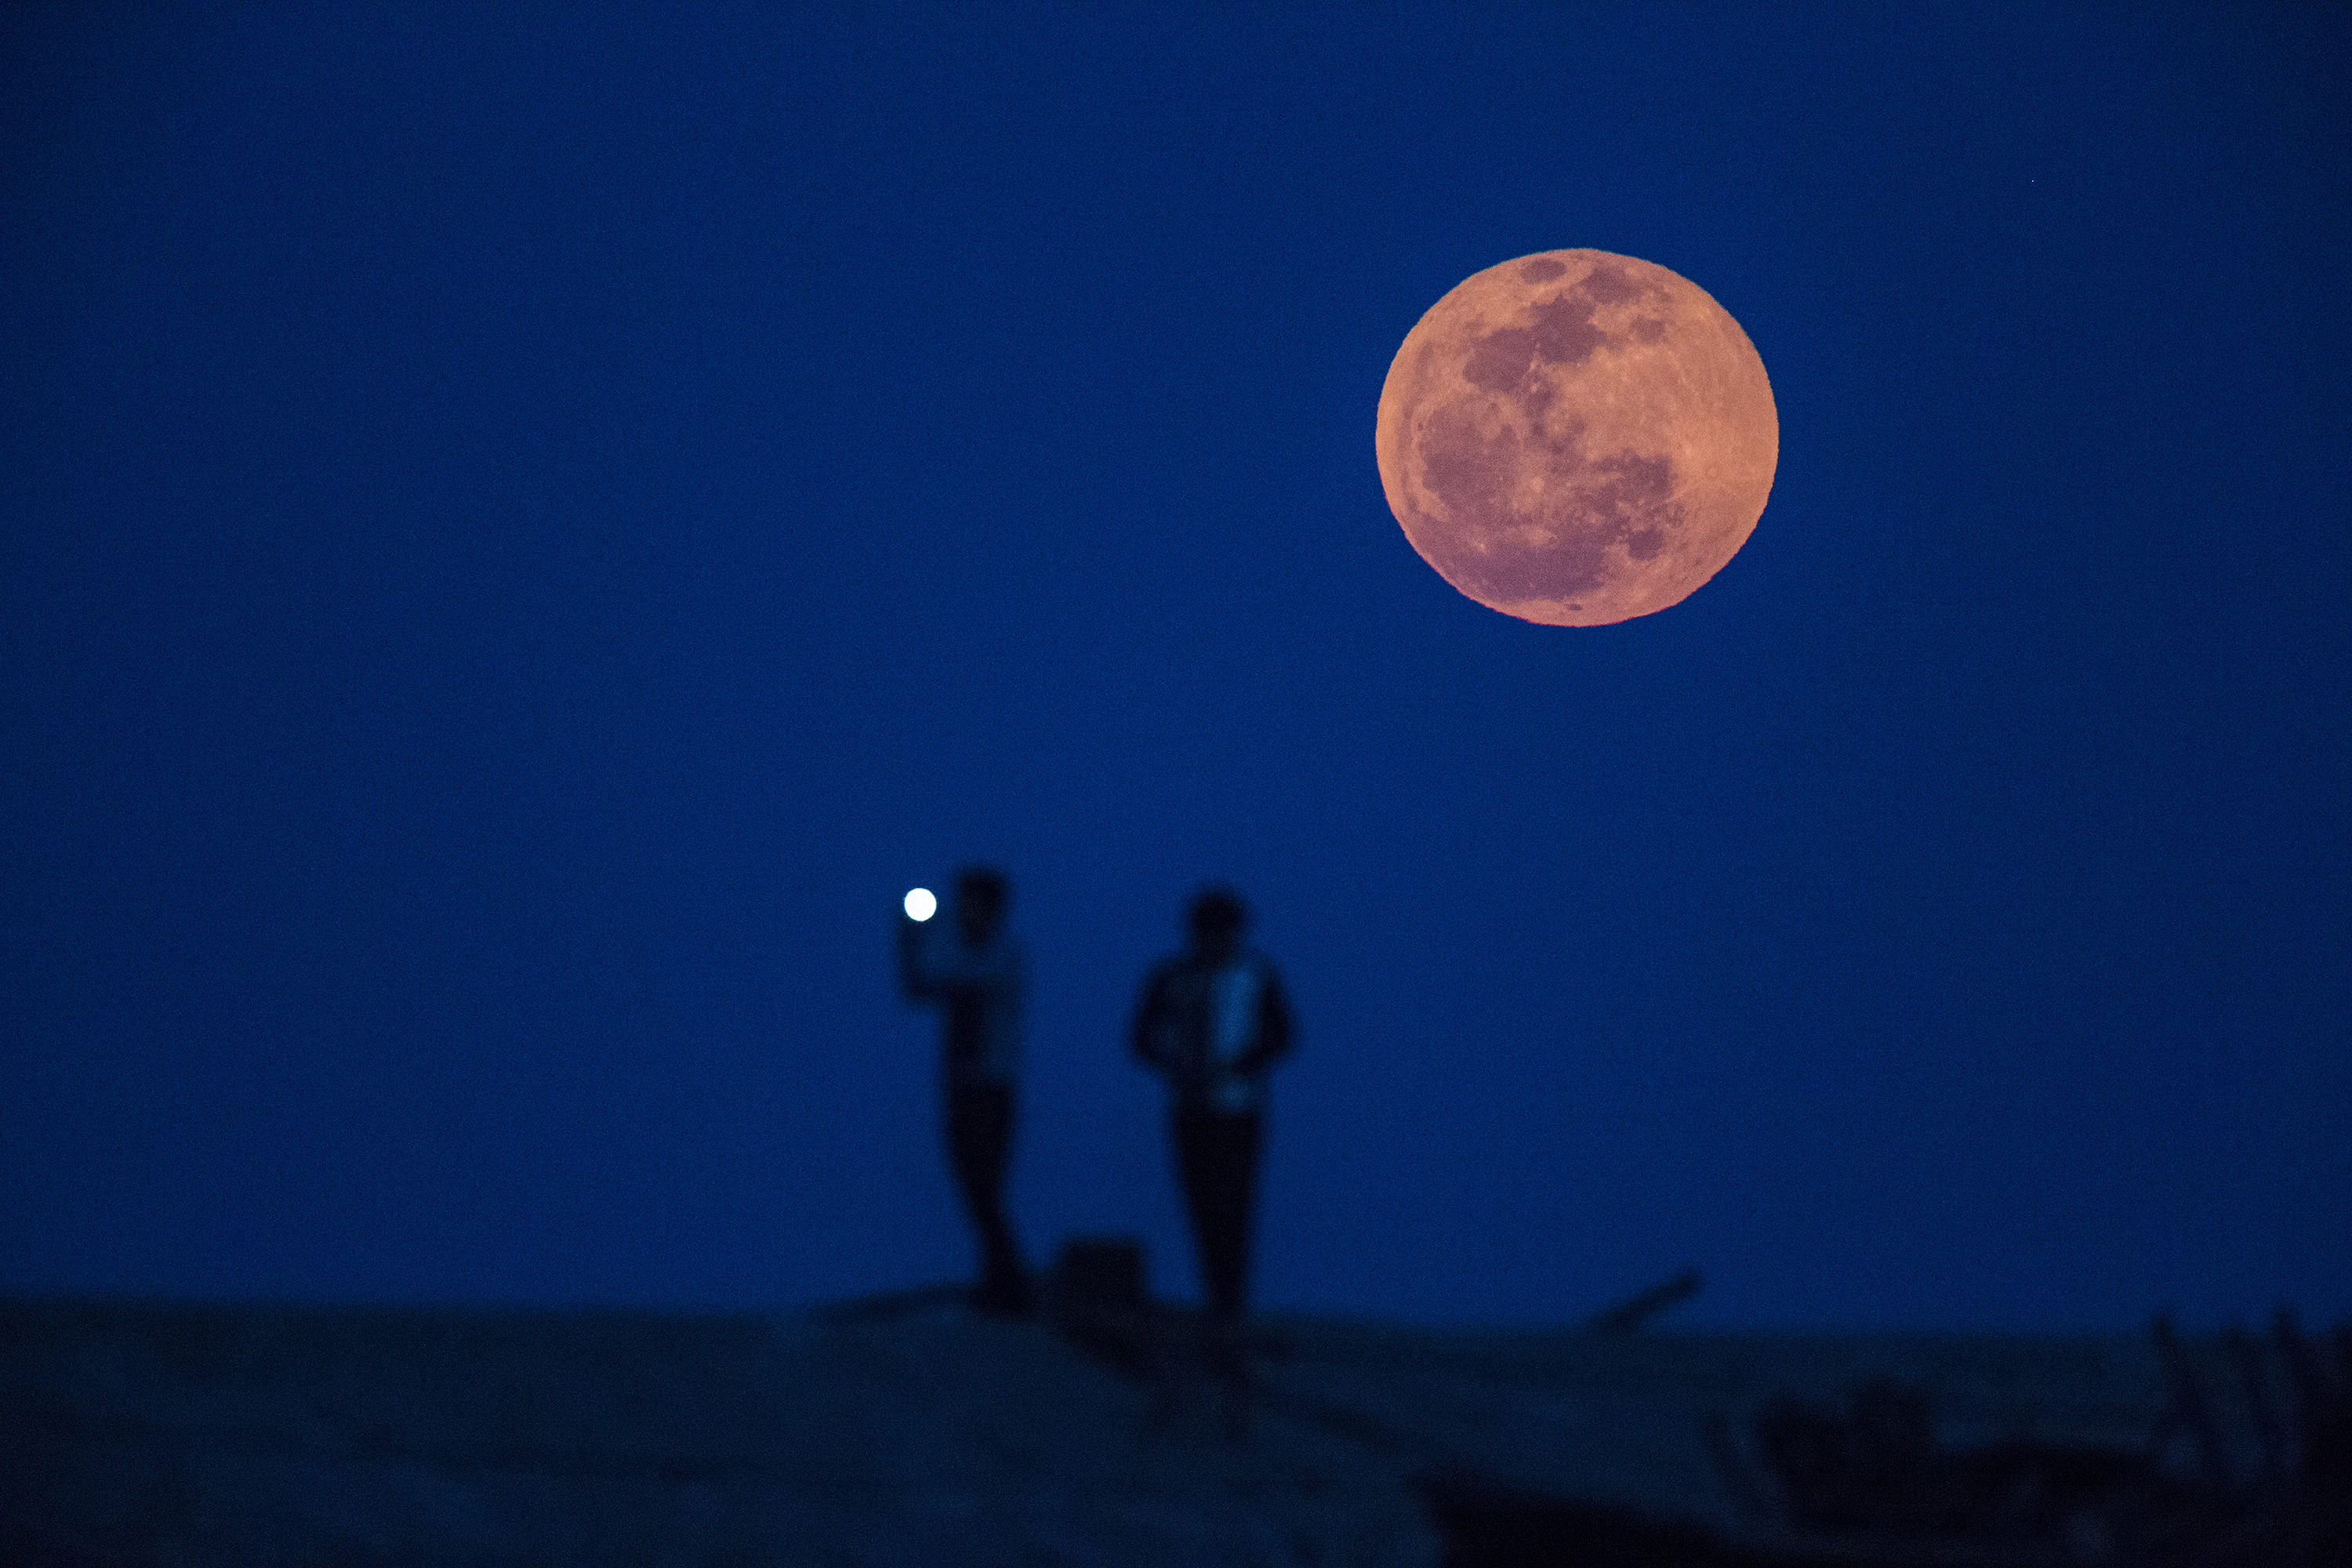 A man takes a picture during moon rise in a suburb of Shanghai